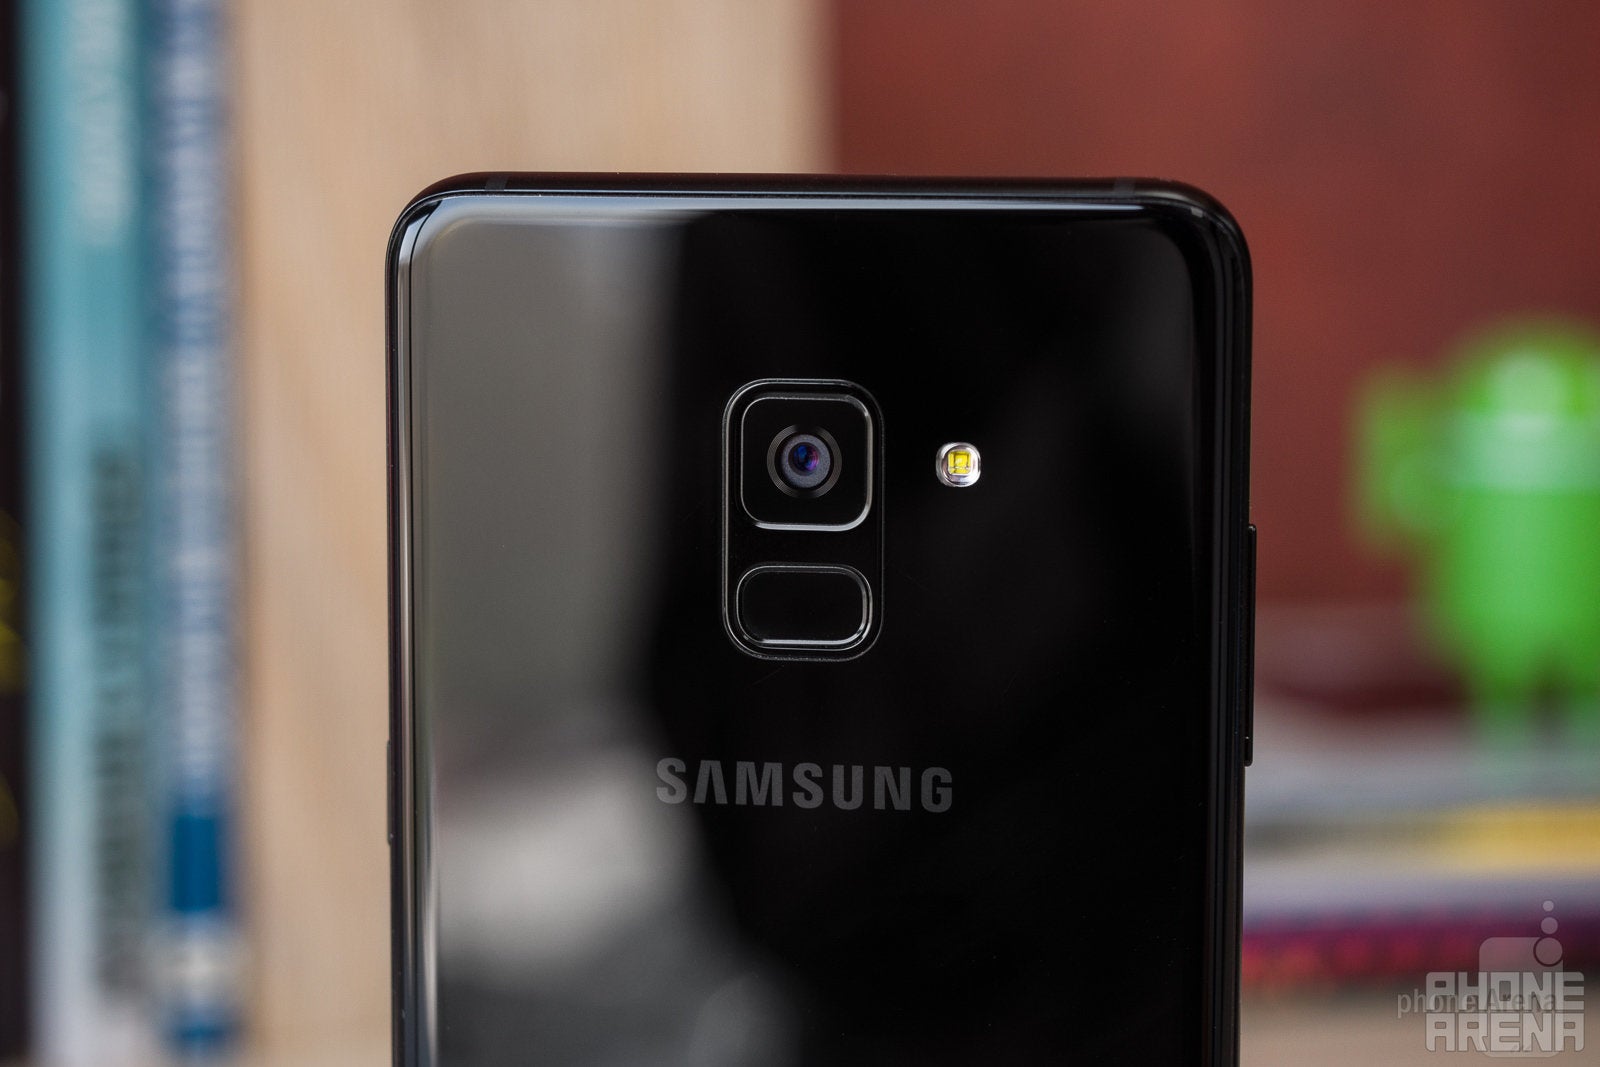 Samsung Galaxy A8+ (2018) Review